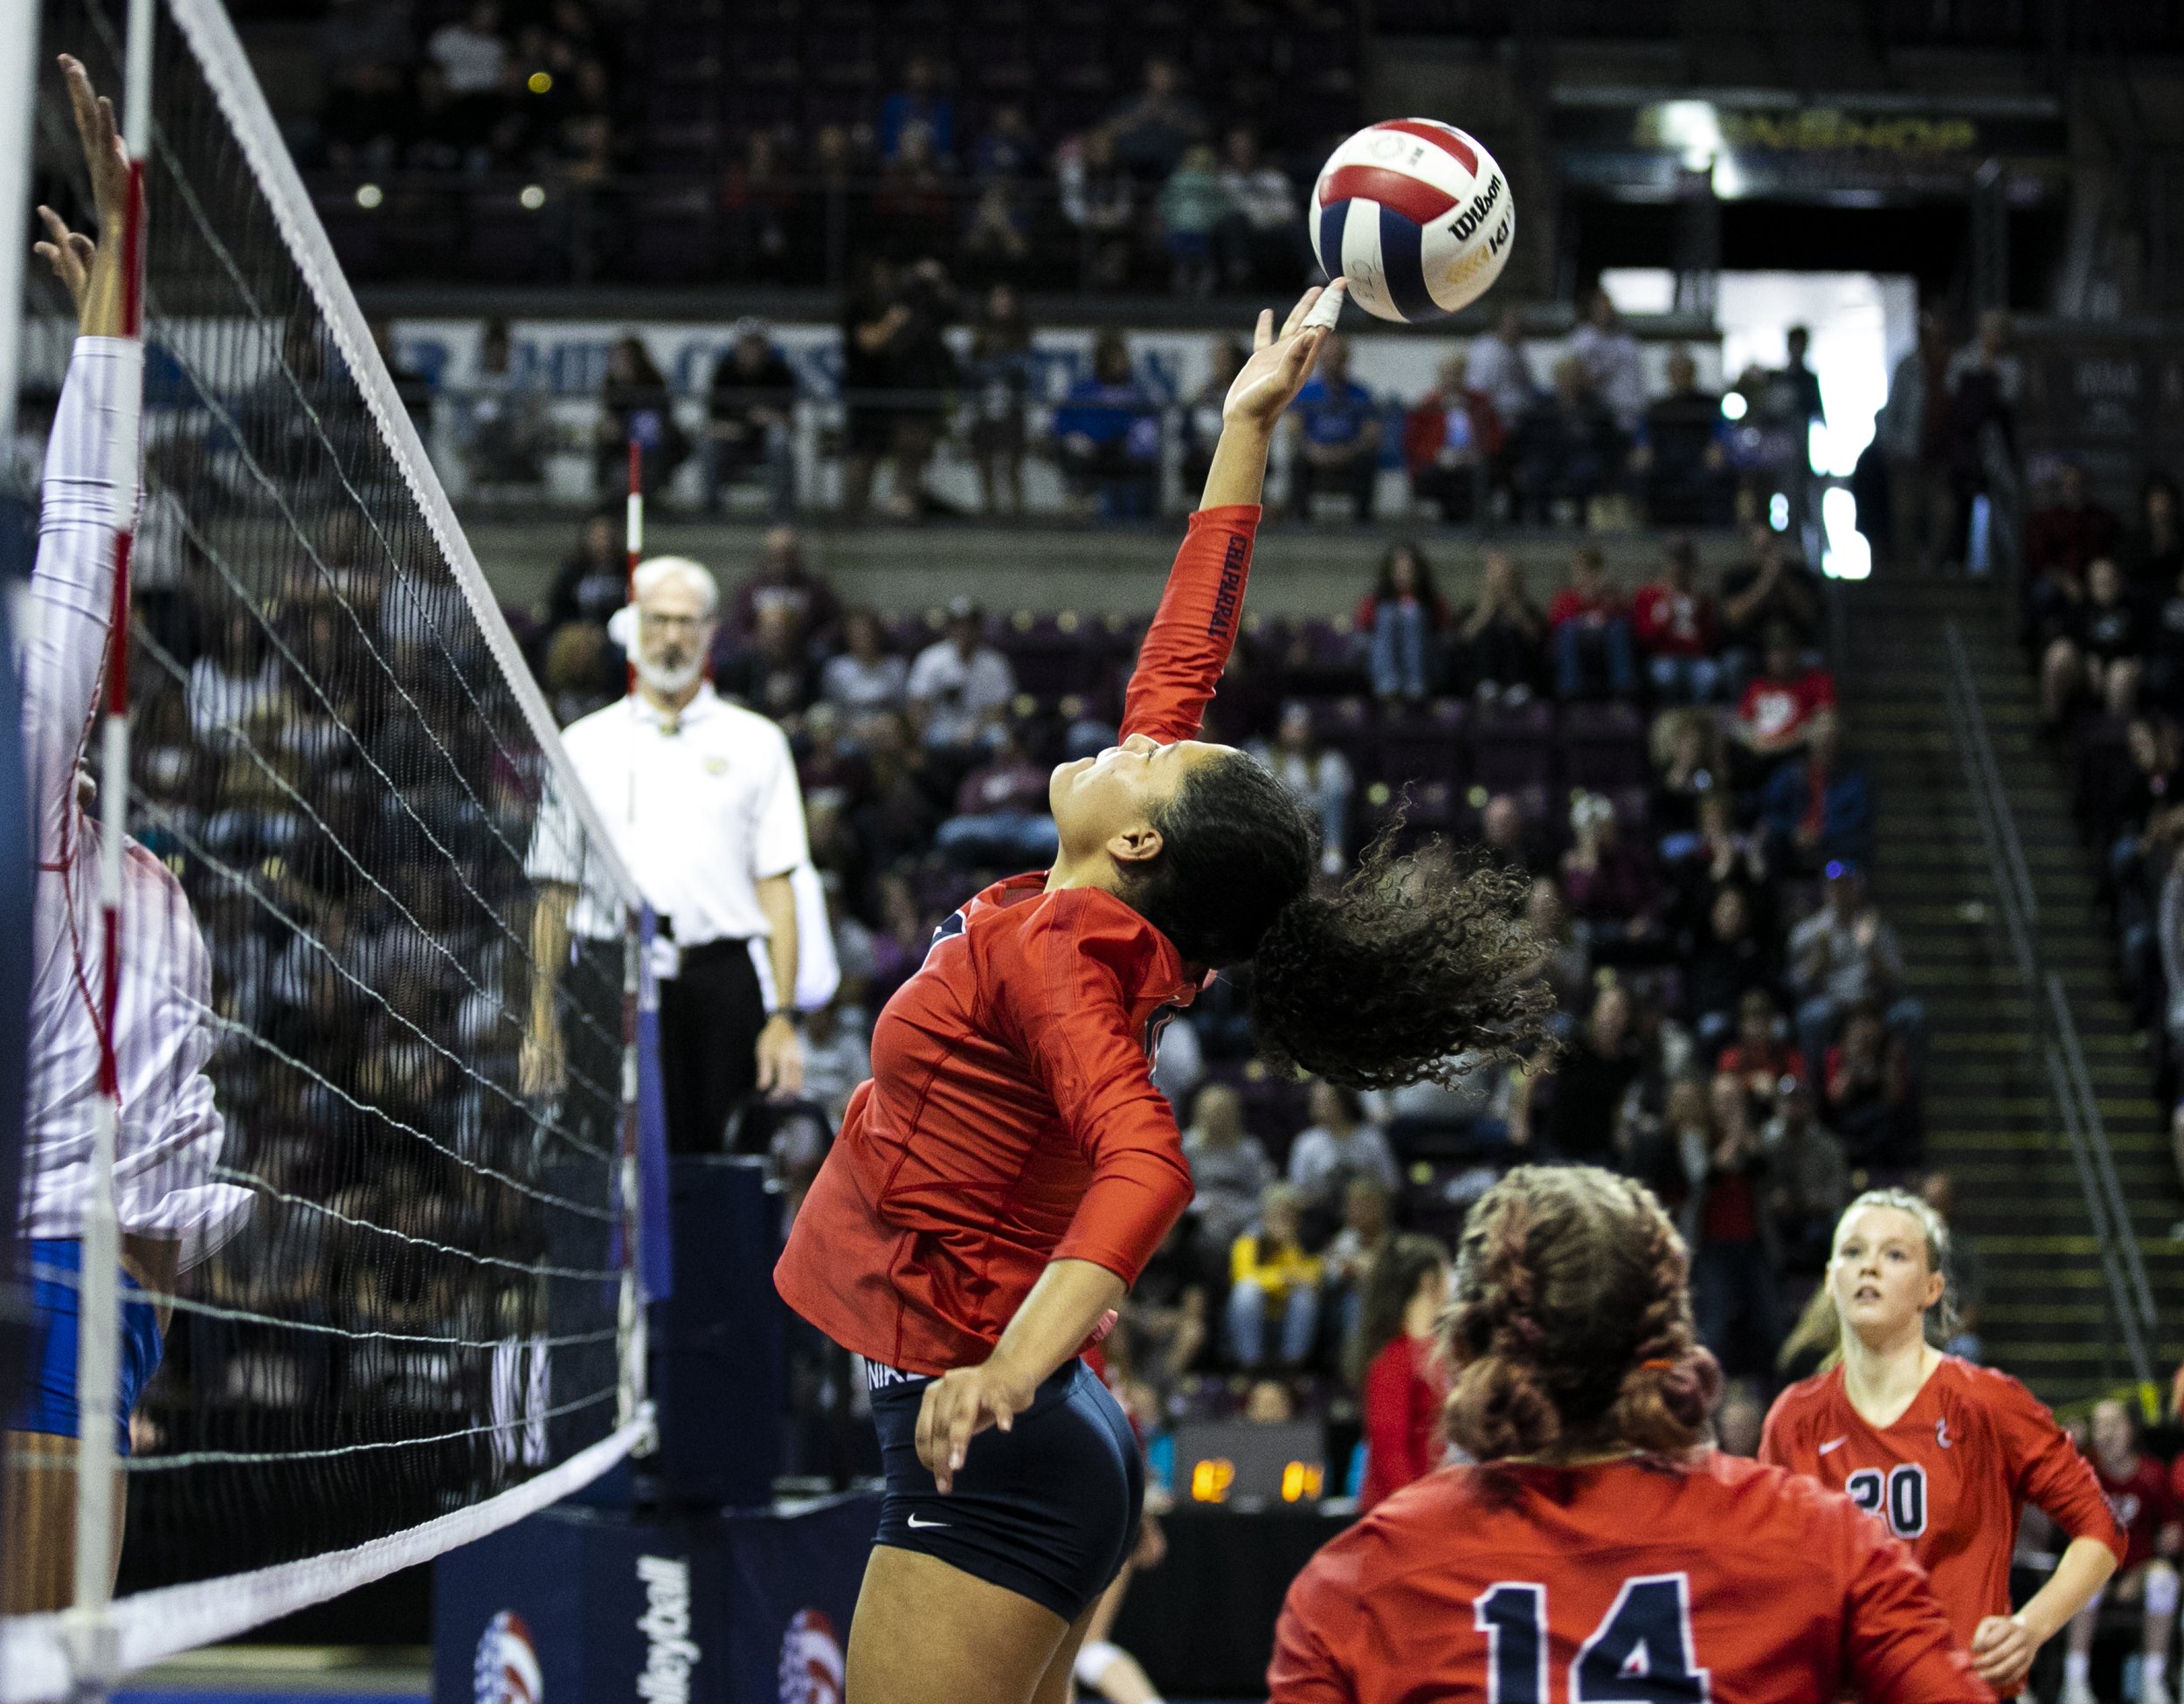  Chaparral High School's Mackenzie Brandon (19) attempts to block a spike during the Class 5A Colorado State Volleyball semifinals at the Broadmoor World Arena in Colorado Springs, Colorado on Saturday, November 13, 2021. Chaparral played a closed ga